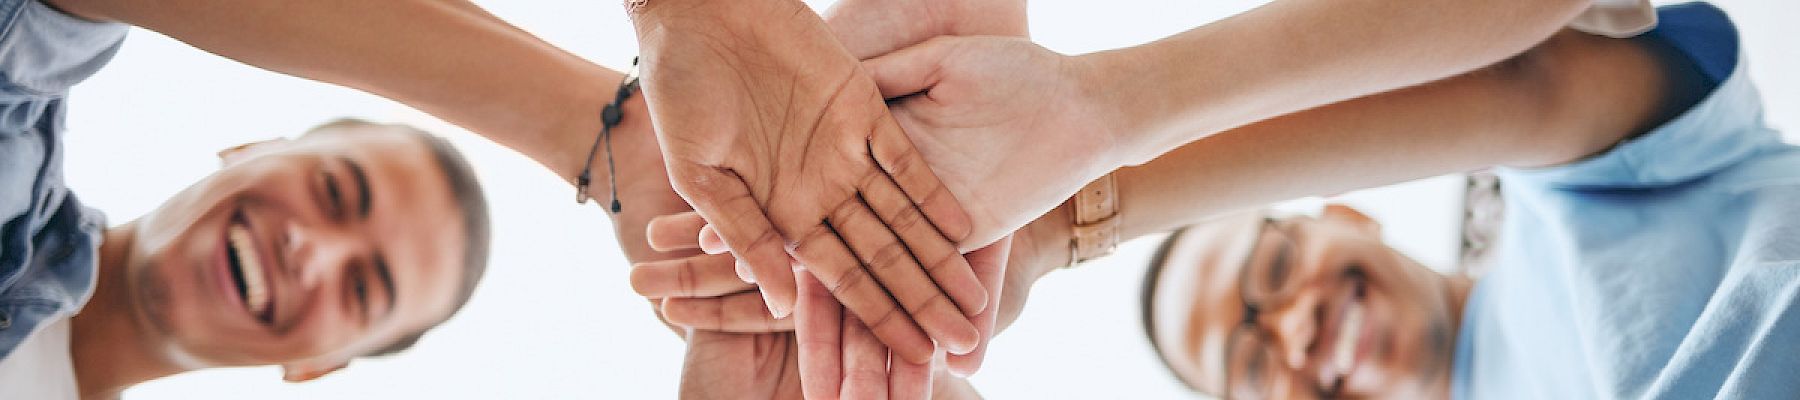 A group of people is stacking hands together in a sign of unity and teamwork.